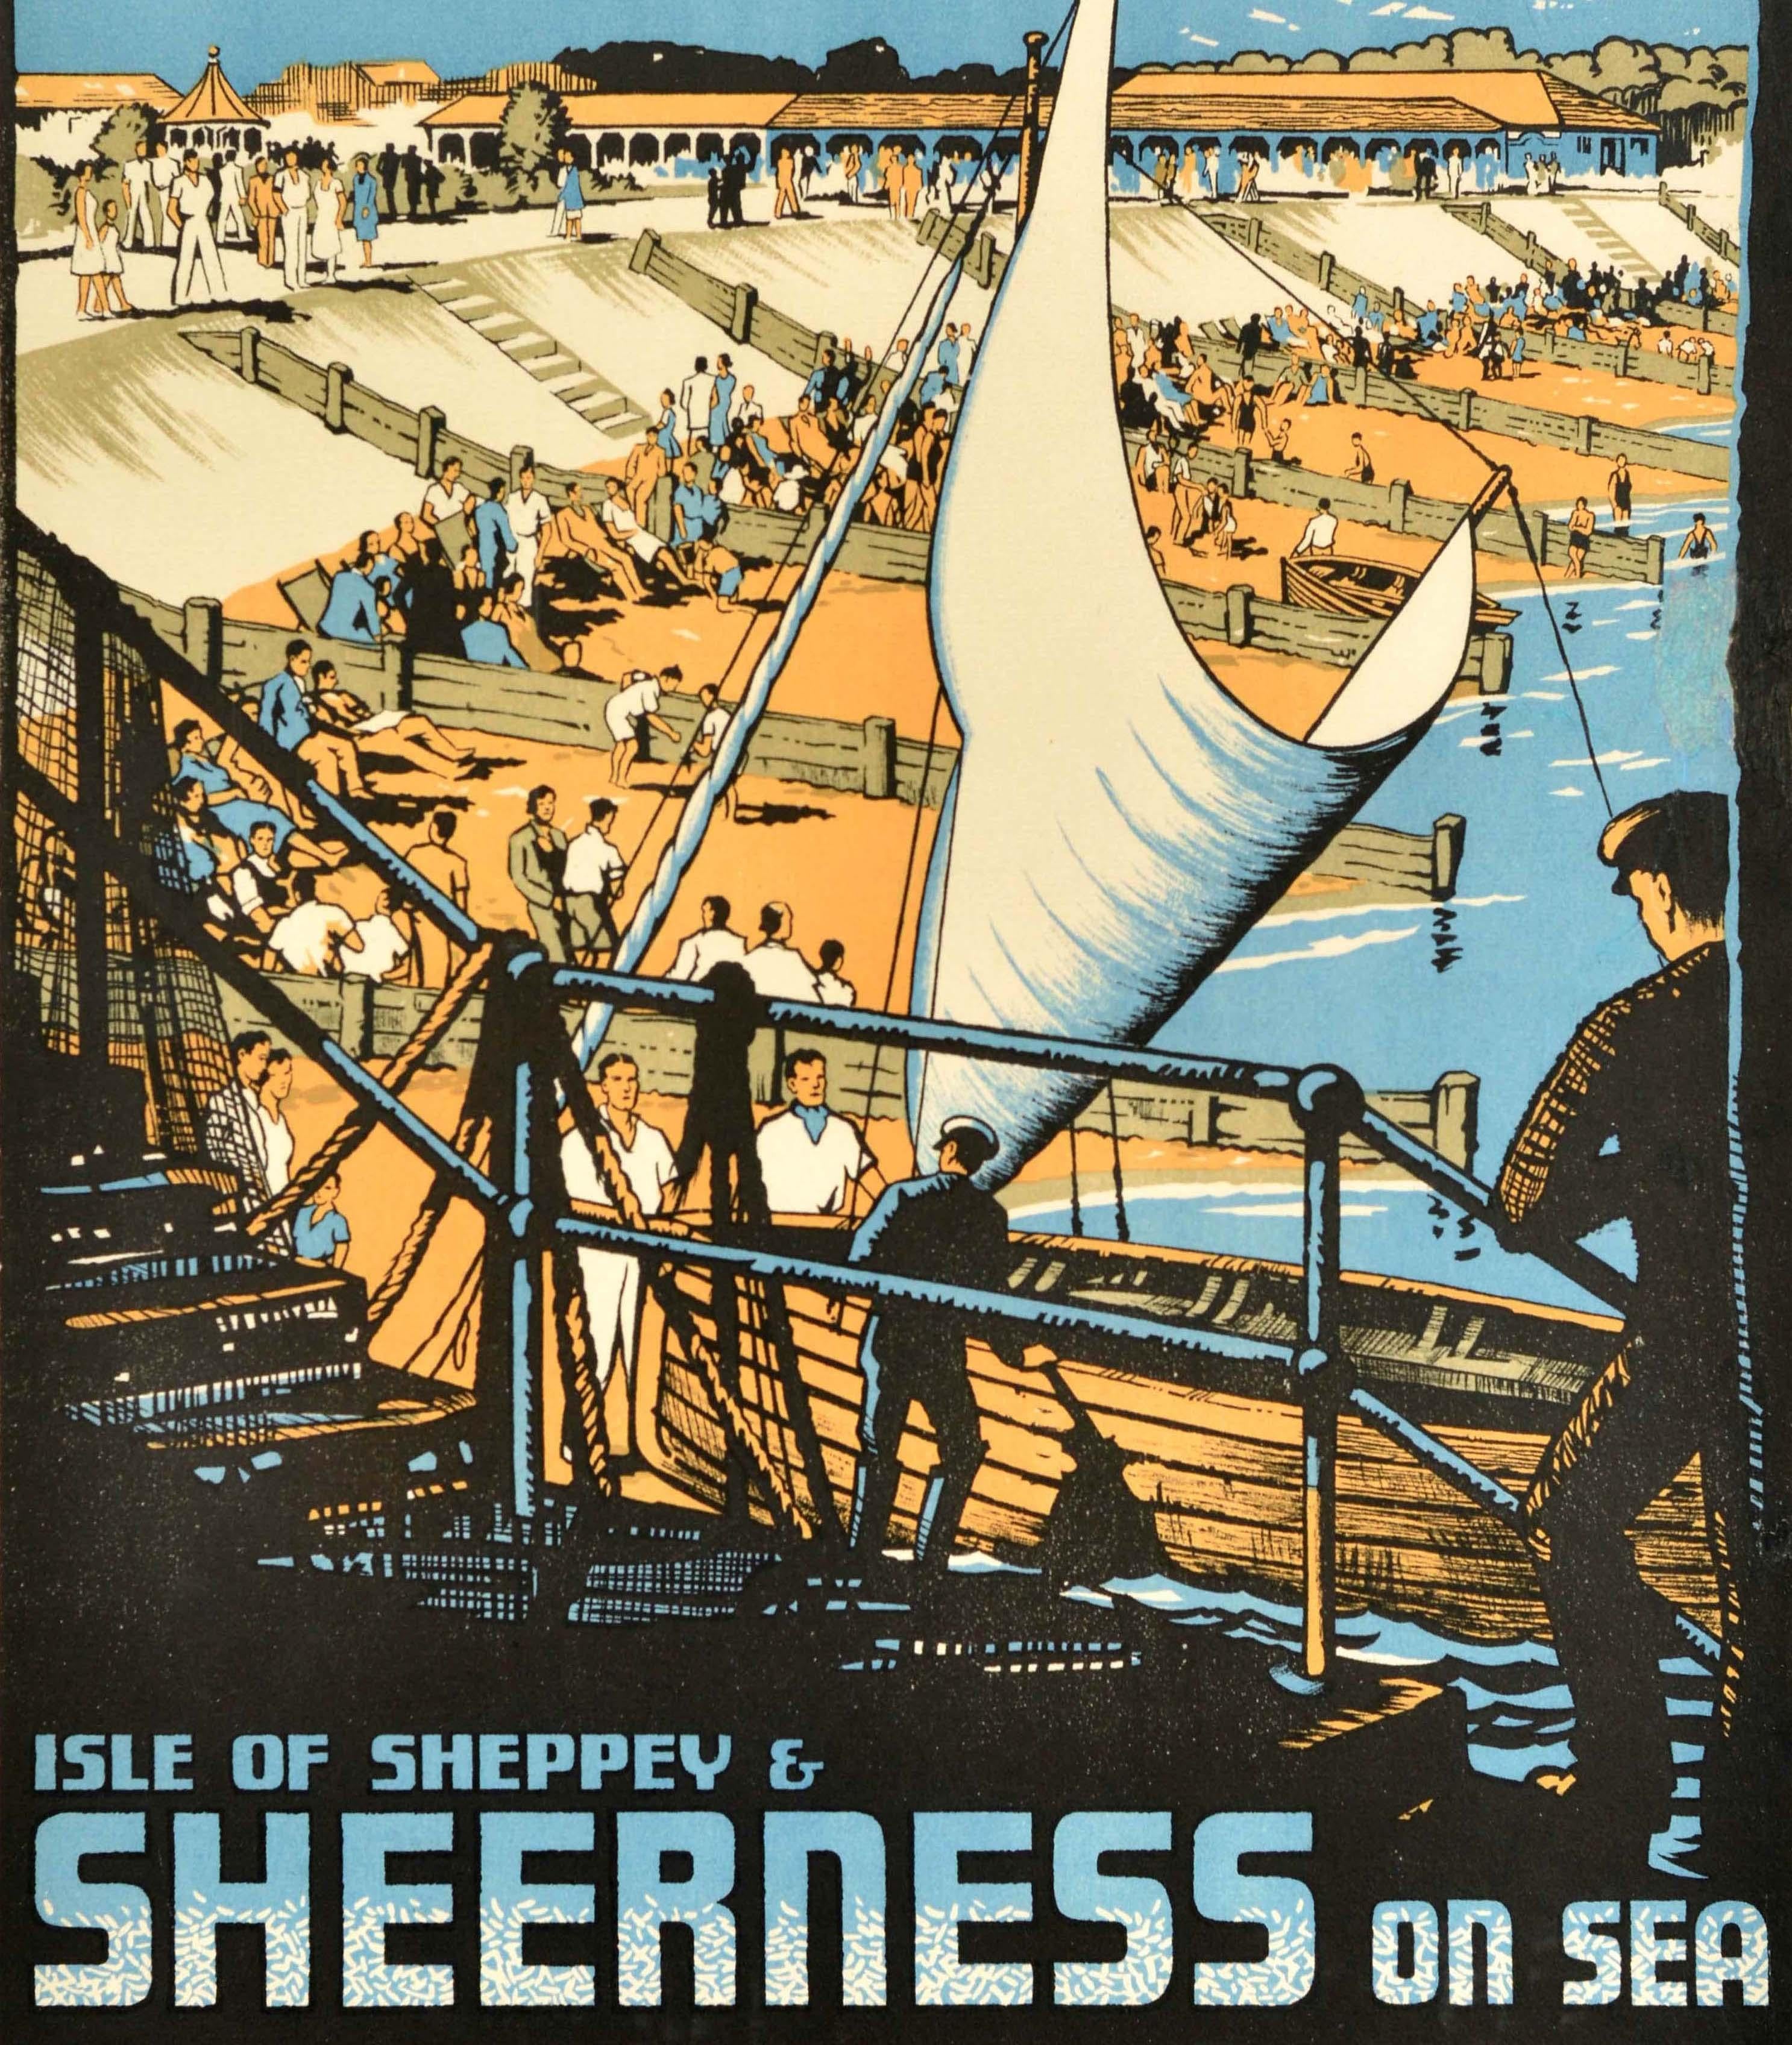 Original vintage train travel poster for the Isle of Sheppey & Sheerness on Sea on the bracing East Kent Coast only 50 miles from London featuring great artwork depicting a man on steps in the foreground looking at the holiday makers sunbathing on